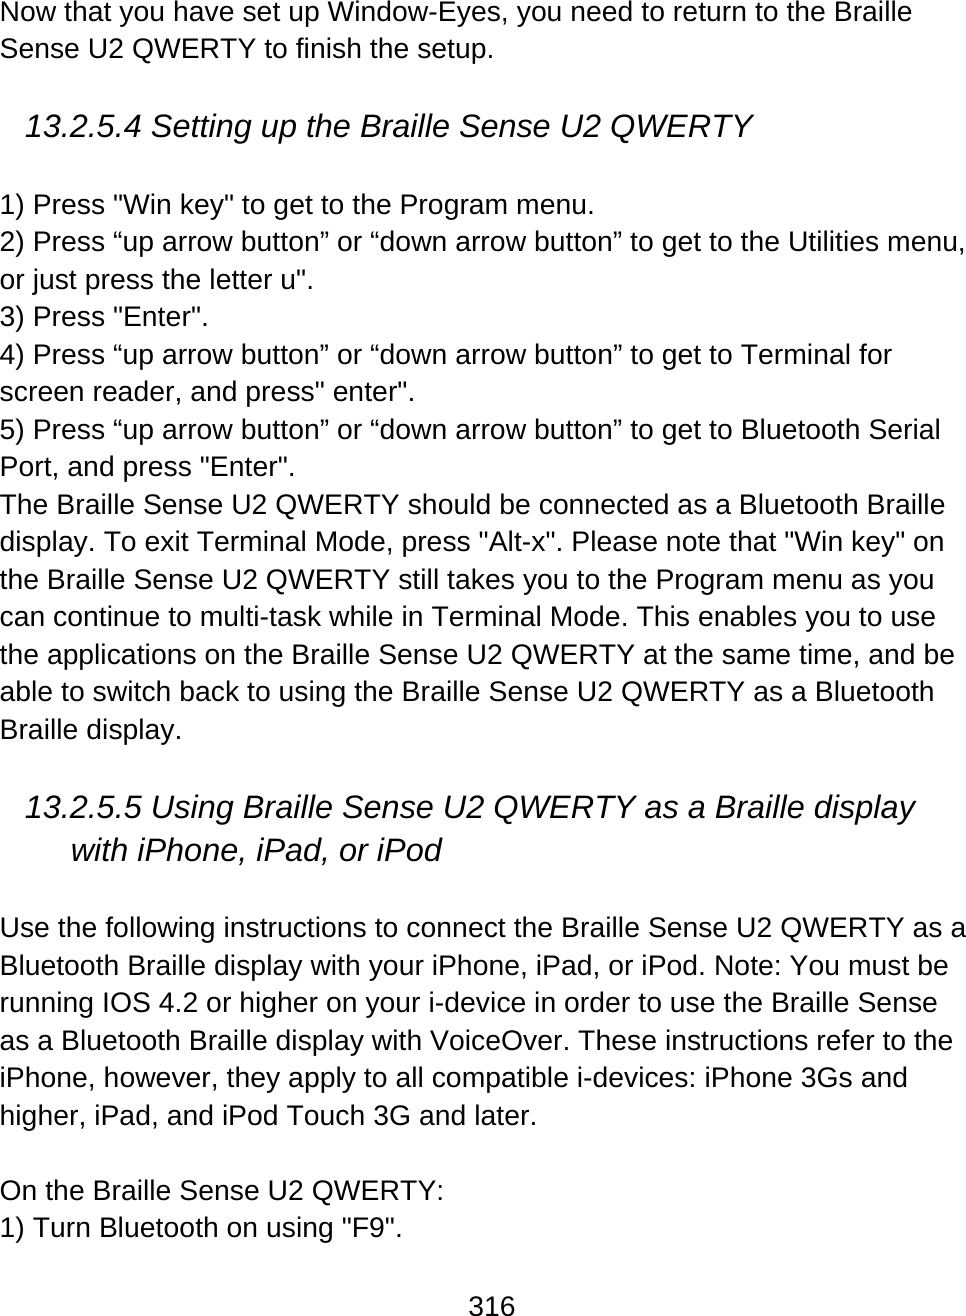 316  Now that you have set up Window-Eyes, you need to return to the Braille Sense U2 QWERTY to finish the setup.   13.2.5.4 Setting up the Braille Sense U2 QWERTY  1) Press &quot;Win key&quot; to get to the Program menu. 2) Press “up arrow button” or “down arrow button” to get to the Utilities menu, or just press the letter u&quot;. 3) Press &quot;Enter&quot;. 4) Press “up arrow button” or “down arrow button” to get to Terminal for screen reader, and press&quot; enter&quot;. 5) Press “up arrow button” or “down arrow button” to get to Bluetooth Serial Port, and press &quot;Enter&quot;. The Braille Sense U2 QWERTY should be connected as a Bluetooth Braille display. To exit Terminal Mode, press &quot;Alt-x&quot;. Please note that &quot;Win key&quot; on the Braille Sense U2 QWERTY still takes you to the Program menu as you can continue to multi-task while in Terminal Mode. This enables you to use the applications on the Braille Sense U2 QWERTY at the same time, and be able to switch back to using the Braille Sense U2 QWERTY as a Bluetooth Braille display.  13.2.5.5 Using Braille Sense U2 QWERTY as a Braille display with iPhone, iPad, or iPod  Use the following instructions to connect the Braille Sense U2 QWERTY as a Bluetooth Braille display with your iPhone, iPad, or iPod. Note: You must be running IOS 4.2 or higher on your i-device in order to use the Braille Sense as a Bluetooth Braille display with VoiceOver. These instructions refer to the iPhone, however, they apply to all compatible i-devices: iPhone 3Gs and higher, iPad, and iPod Touch 3G and later.  On the Braille Sense U2 QWERTY: 1) Turn Bluetooth on using &quot;F9&quot;. 